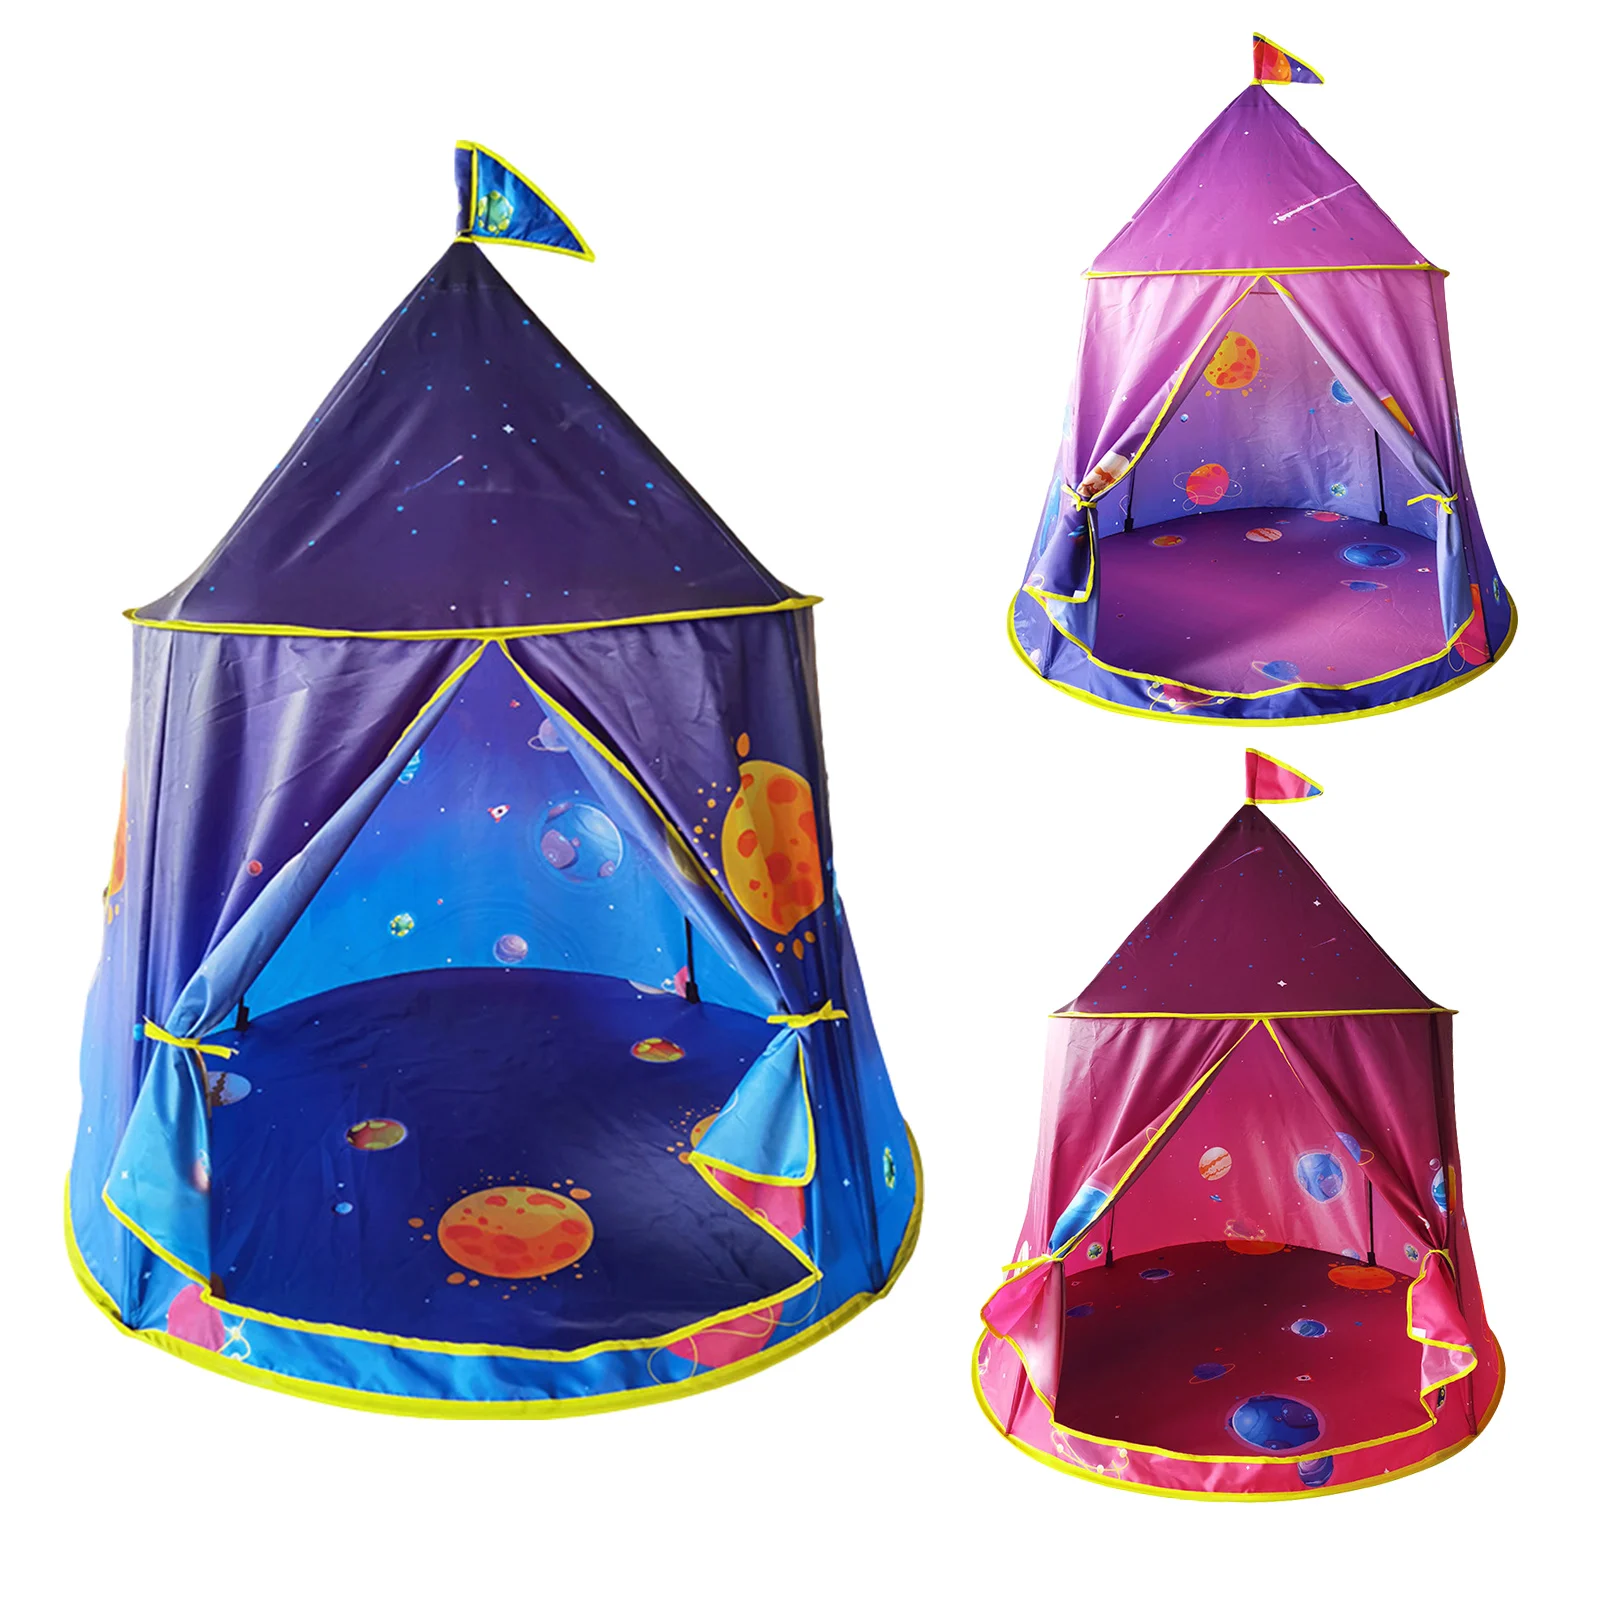 

Space World Play Tent Playhouse Indoor Privacy Yurt Tent For Kids Kids Space Tent Safety High Quality Guaranteed